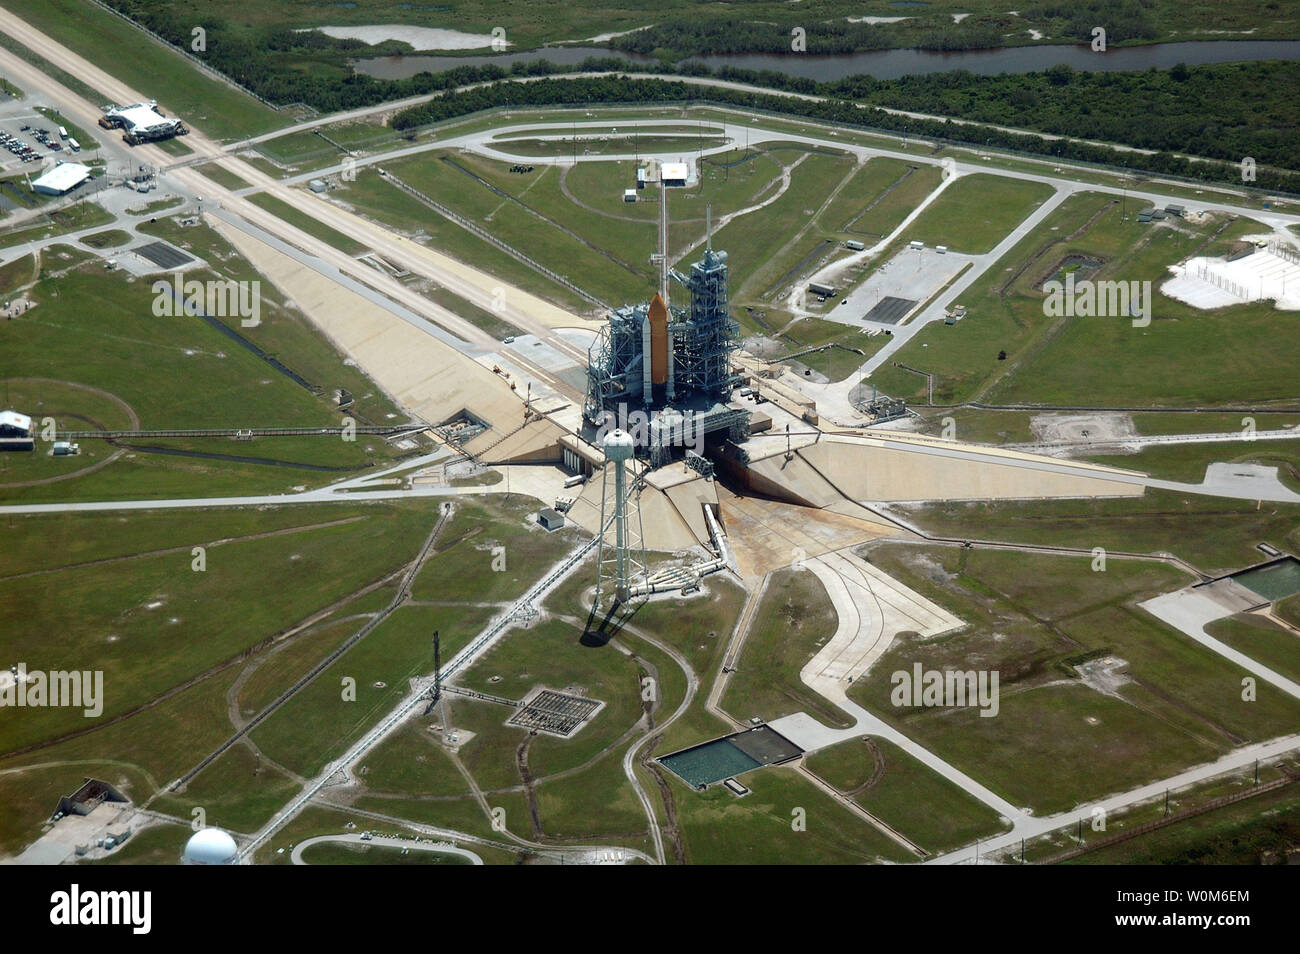 An aerial view of part of the Kennedy Space Center's giant complex featuring the Vehicle Assembly Building (VAB) and surrounding area. The Space Shuttle Discovery and its support stack of hardware, just a few days earlier, took the long, slow journey from the VAB atop the crawler/transport vehicle to Launch Pad 39B in preparation for the STS-114 mission.  NASA is planning to launch Discovery sometime in late July, when the seven-member Return to Flight crew will fly to the International Space Station primarily to test and evaluate new safety procedures. There have been many safety improvements Stock Photo